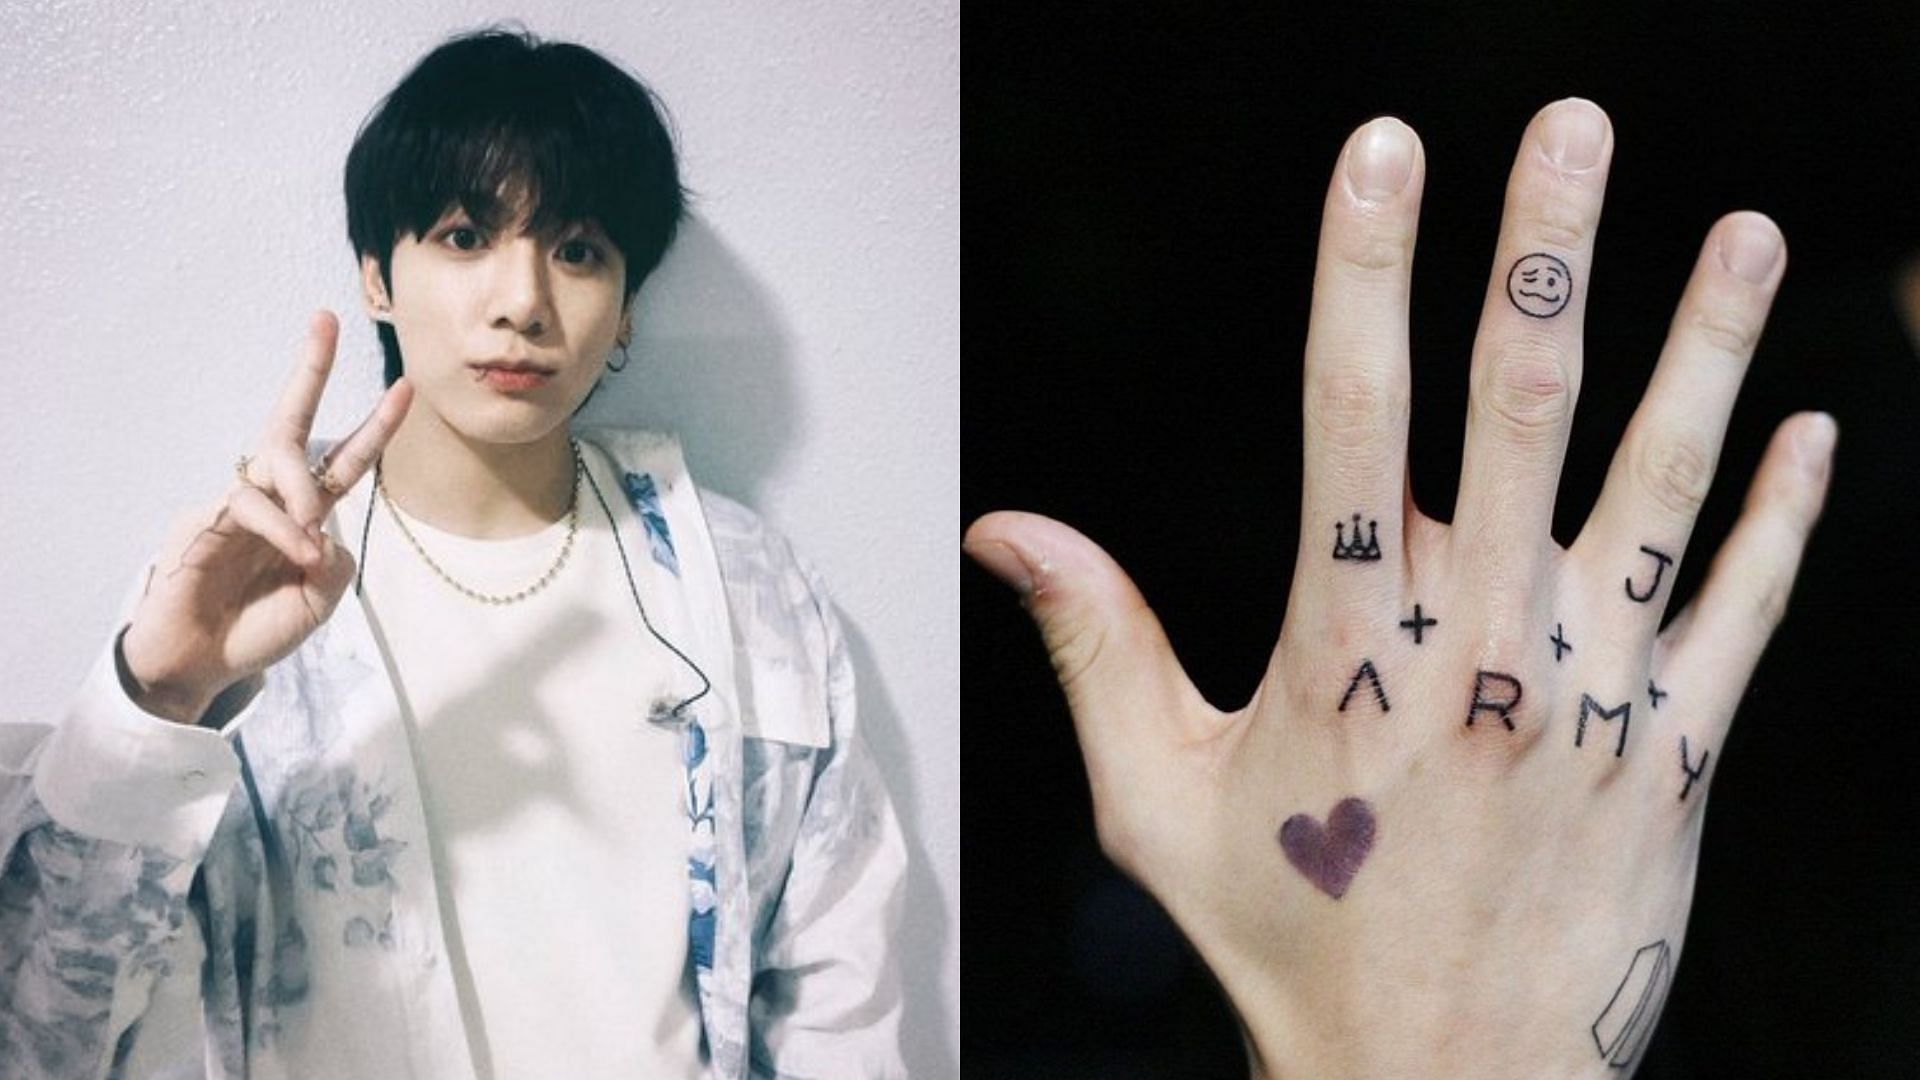 Eye tattoo to Arm clock: BTS' Jungkook tattoo breakdown and meanings  explored